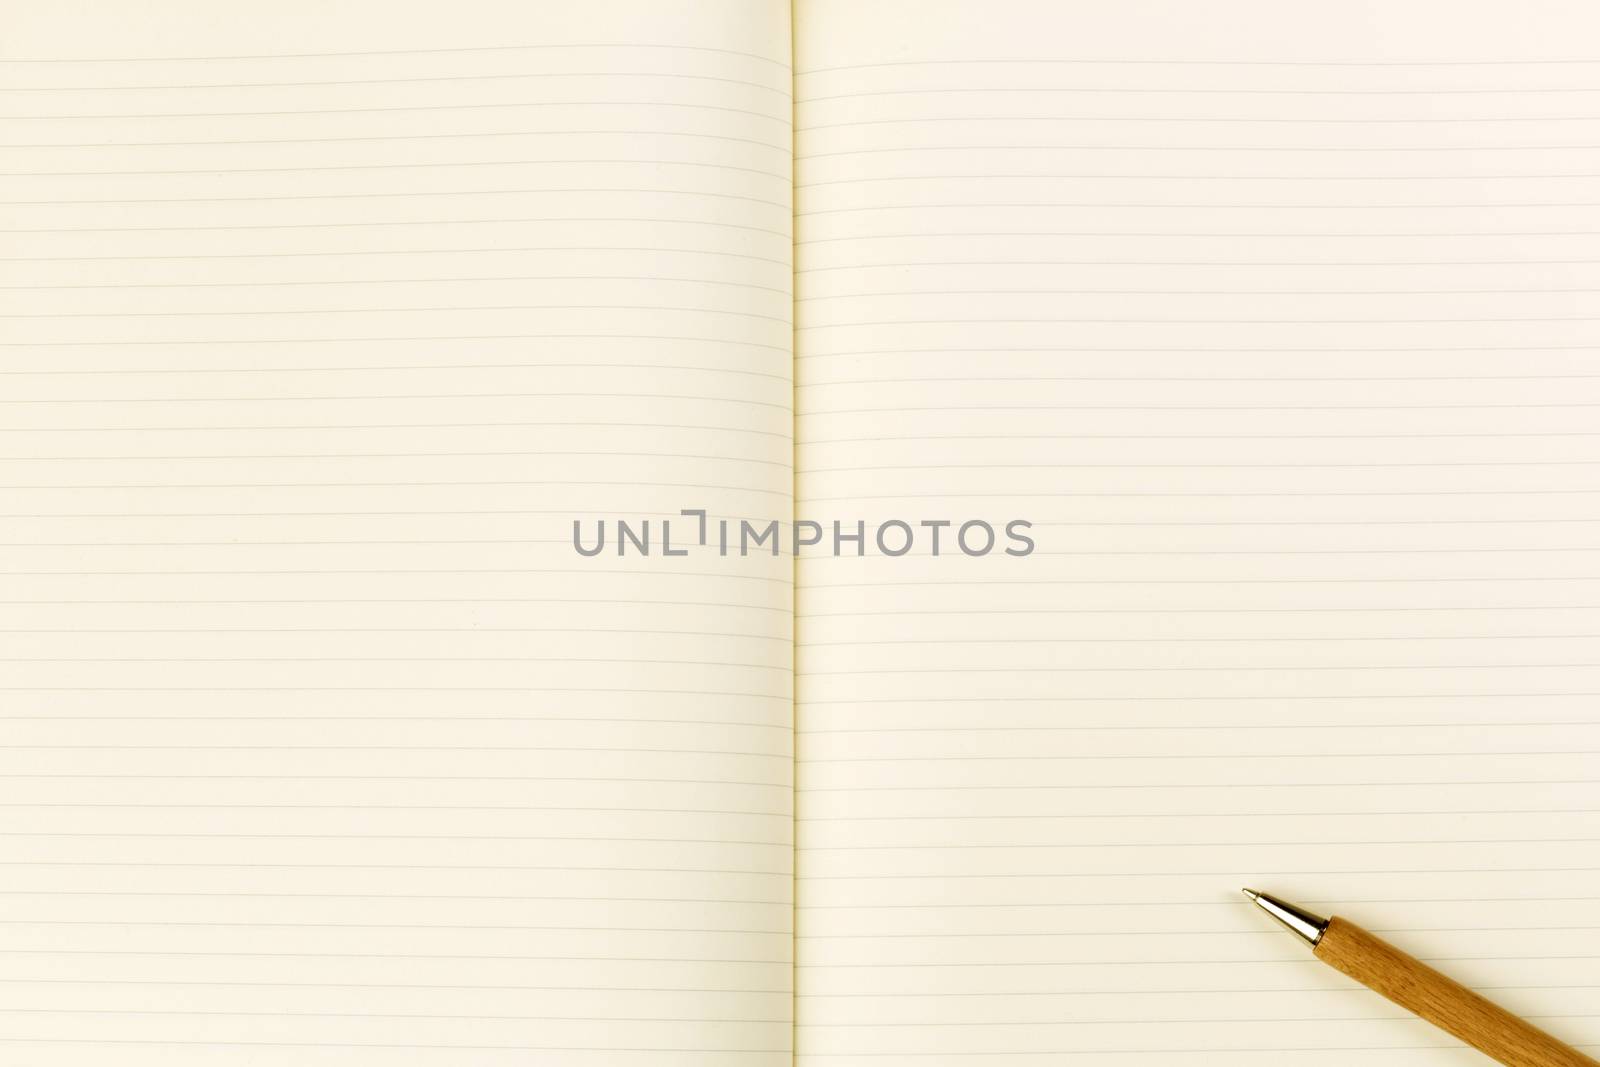 Blank lined notebook with pen placed at a diagonal